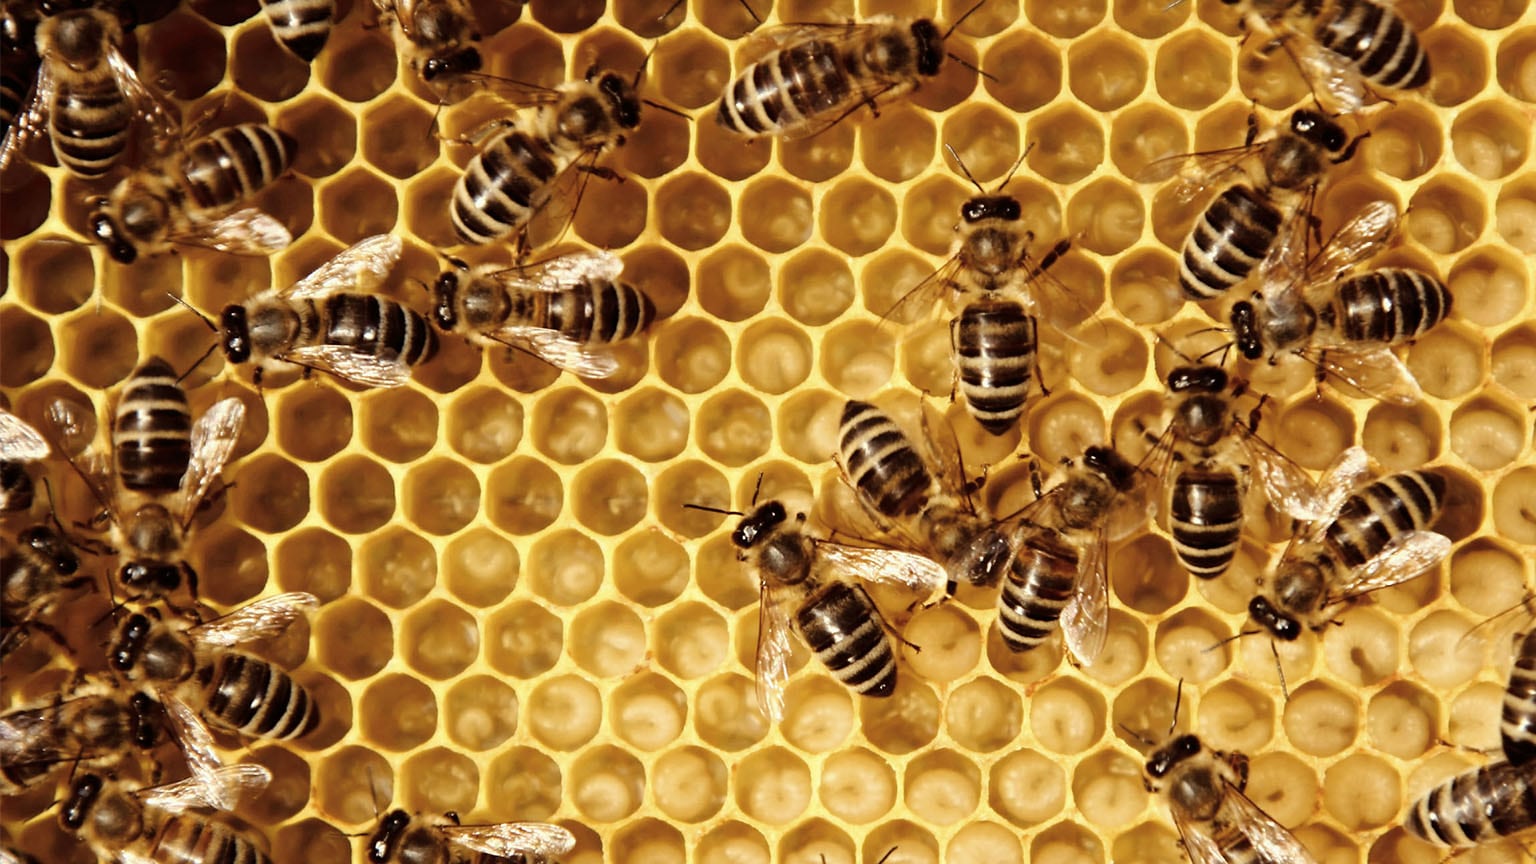 Image of bees on a honeycomb